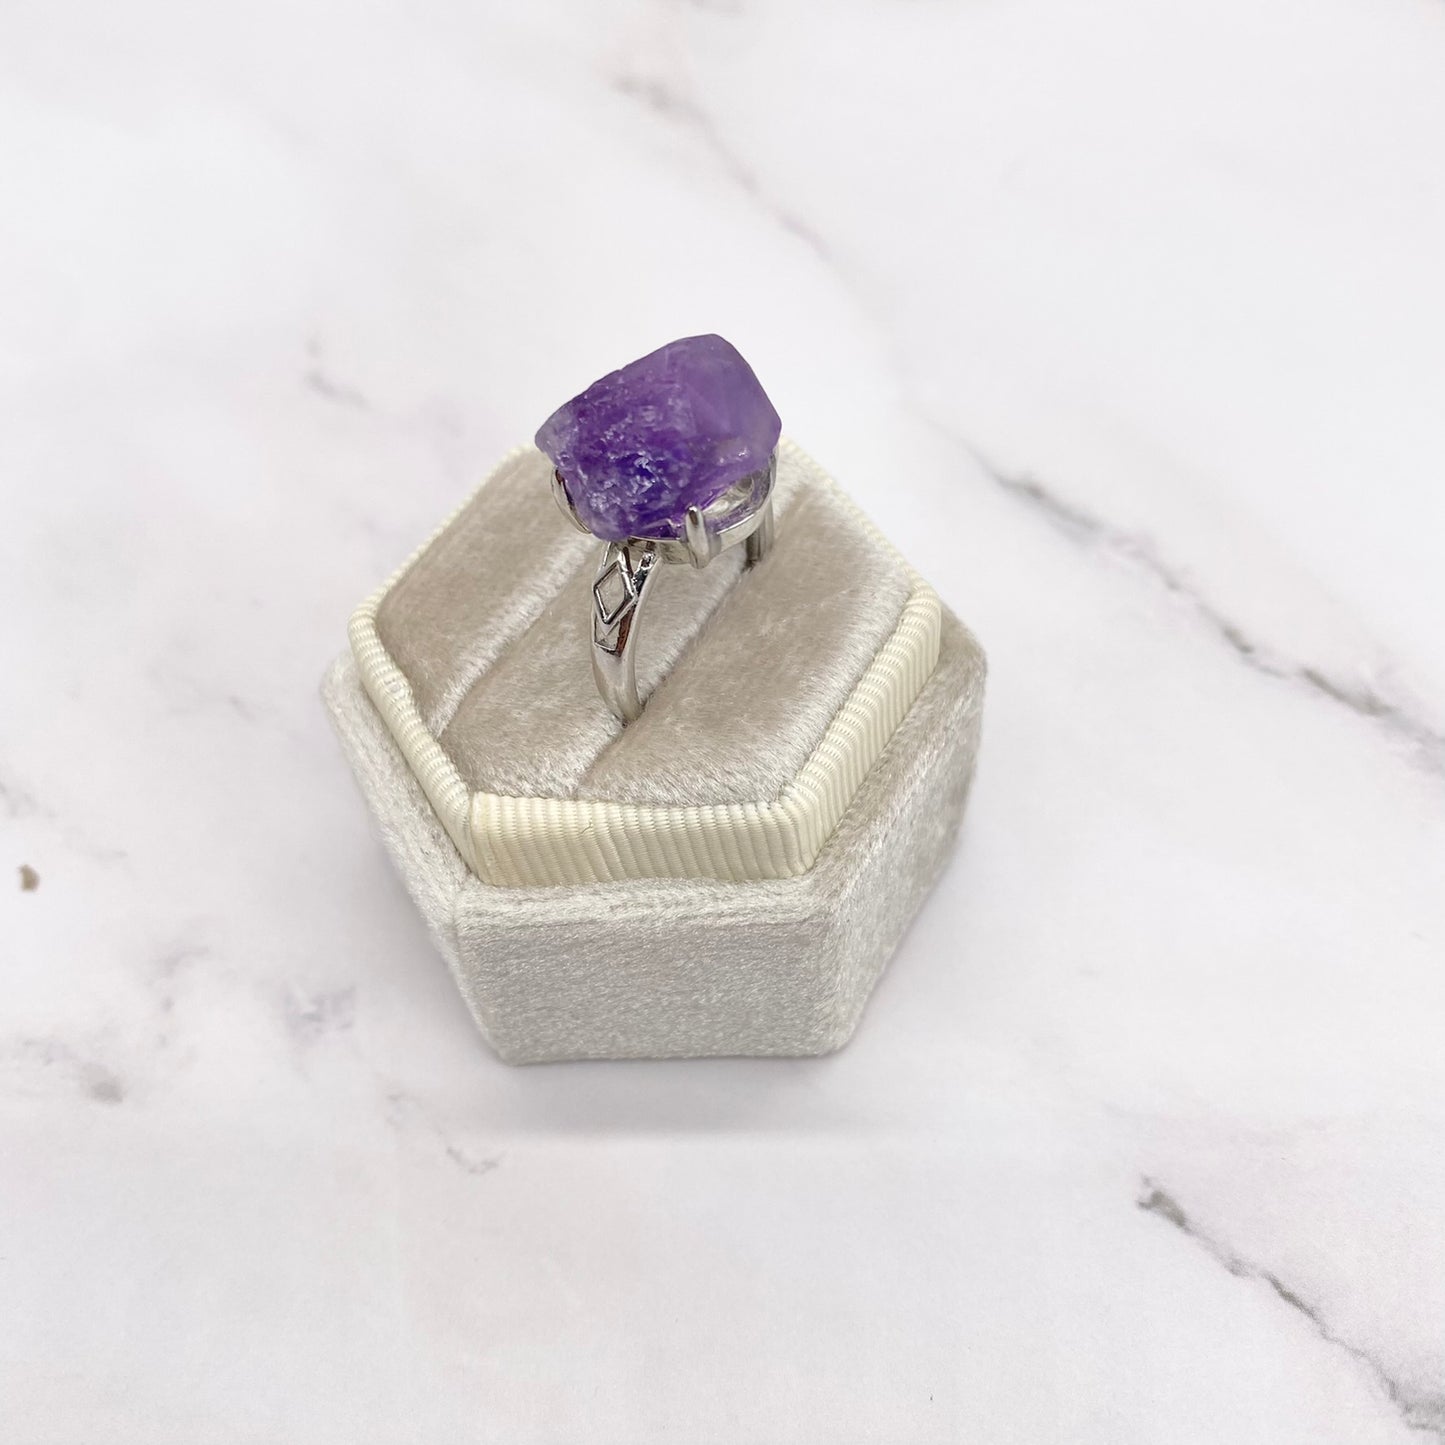 Amethyst Ring, Raw Crystal Ring, Gemstone Jewelry, Handmade Rings, Bohemian Jewelry, Cute Women Ring, Gift For Her, Statement Ring